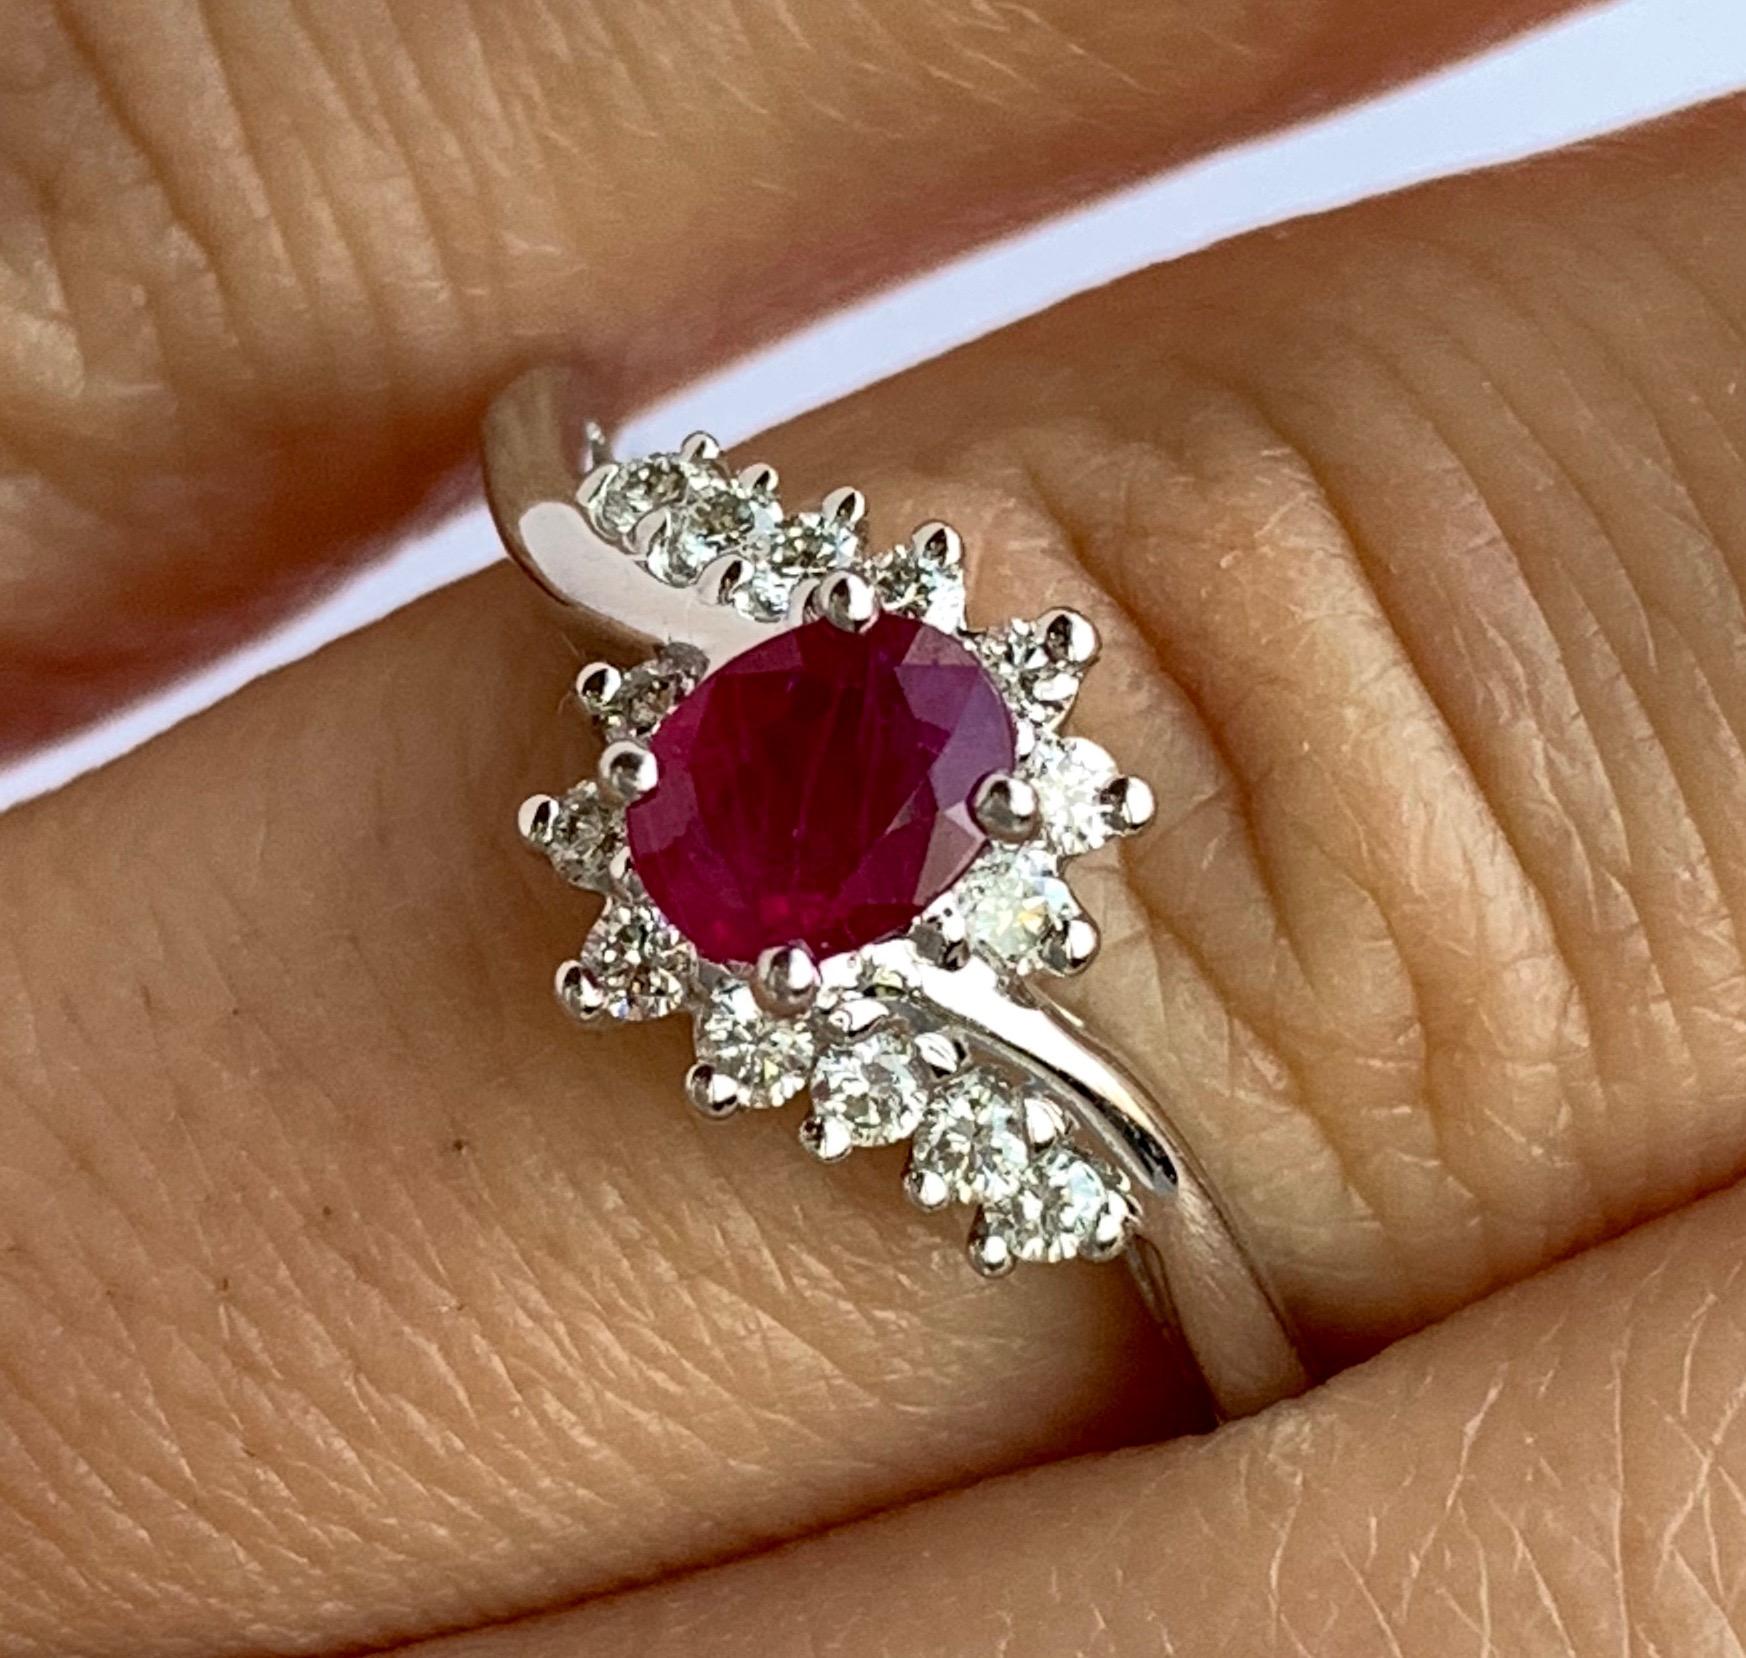 Material: 14k White Gold 
Center Stone Details: 0.48 Carat Oval Ruby measuring 5x4 mm
Mounting Diamond Details: 20 Brilliant Round White Diamonds at 0.20 Carats - Clarity: SI / Color: H-I
Ring Size: Size 6.5. Alberto offers complimentary sizing on